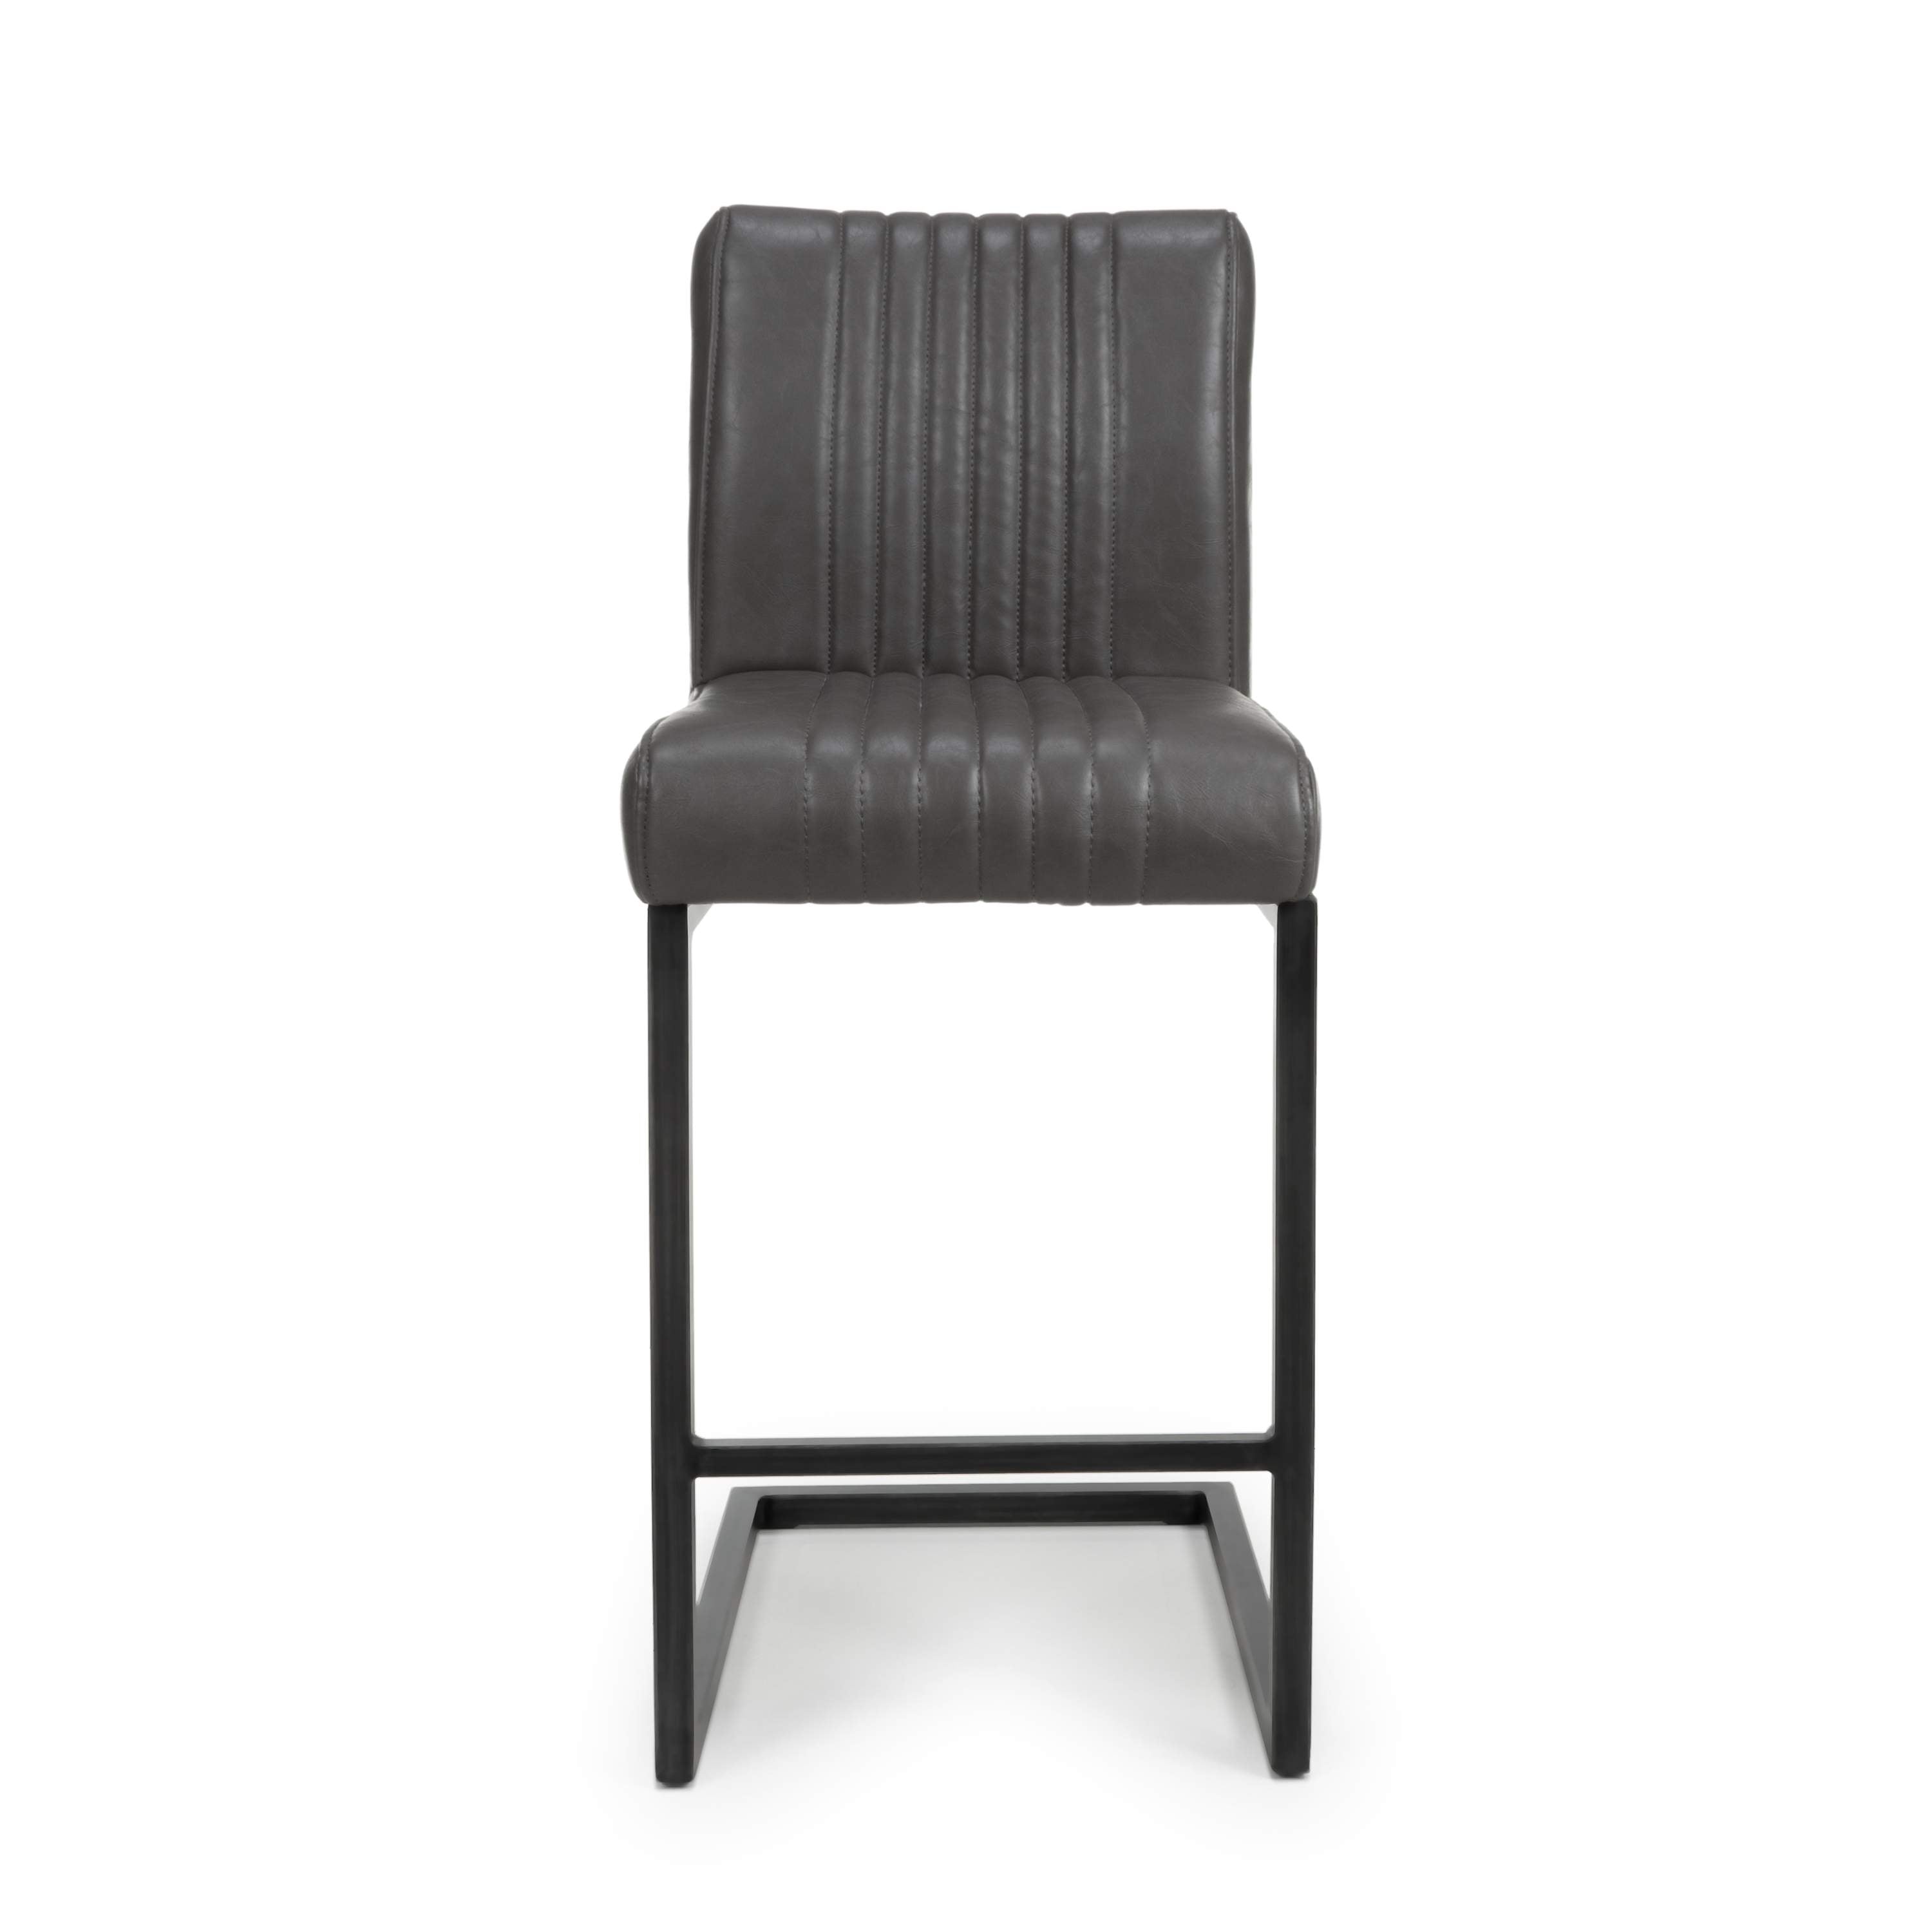 Pair of Leather effect Grey Bar Chair